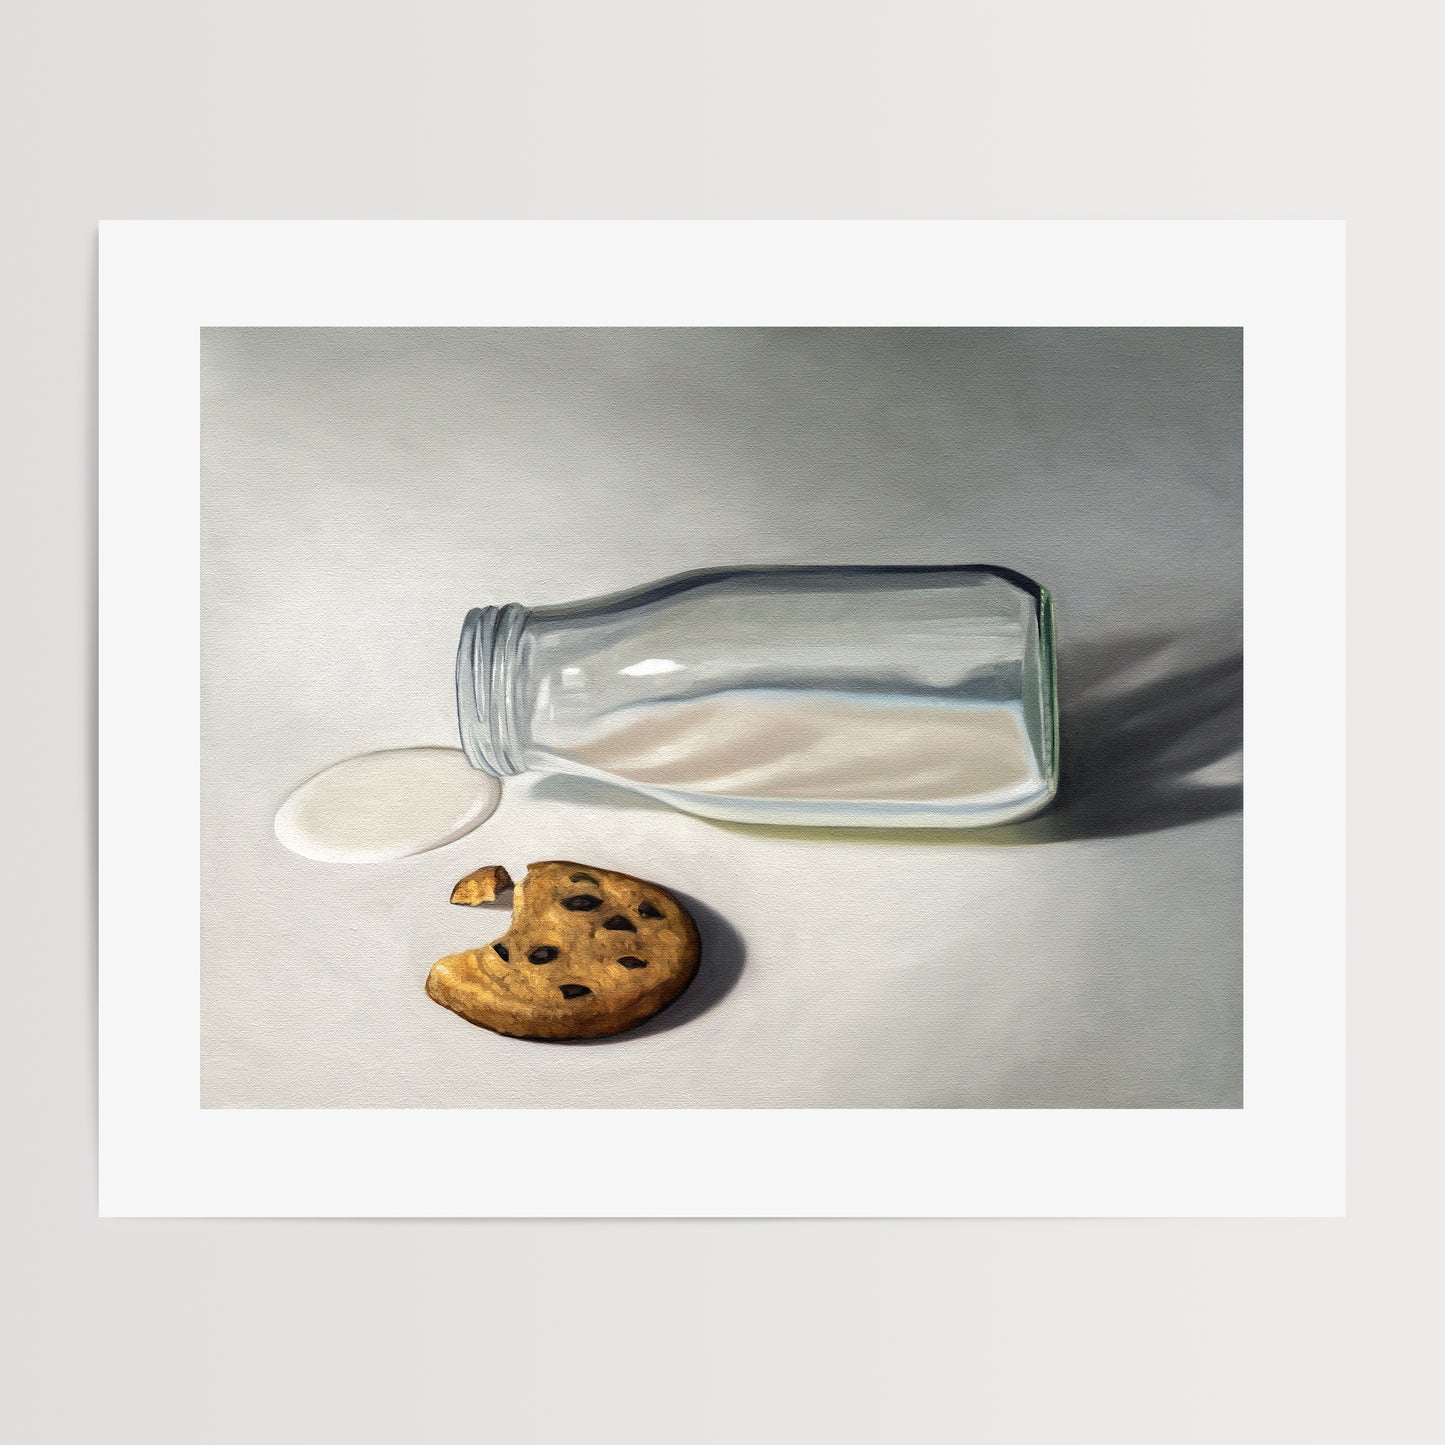 This artwork features a spilled glass bottle of milk alongside a single chocolate chip cookie.